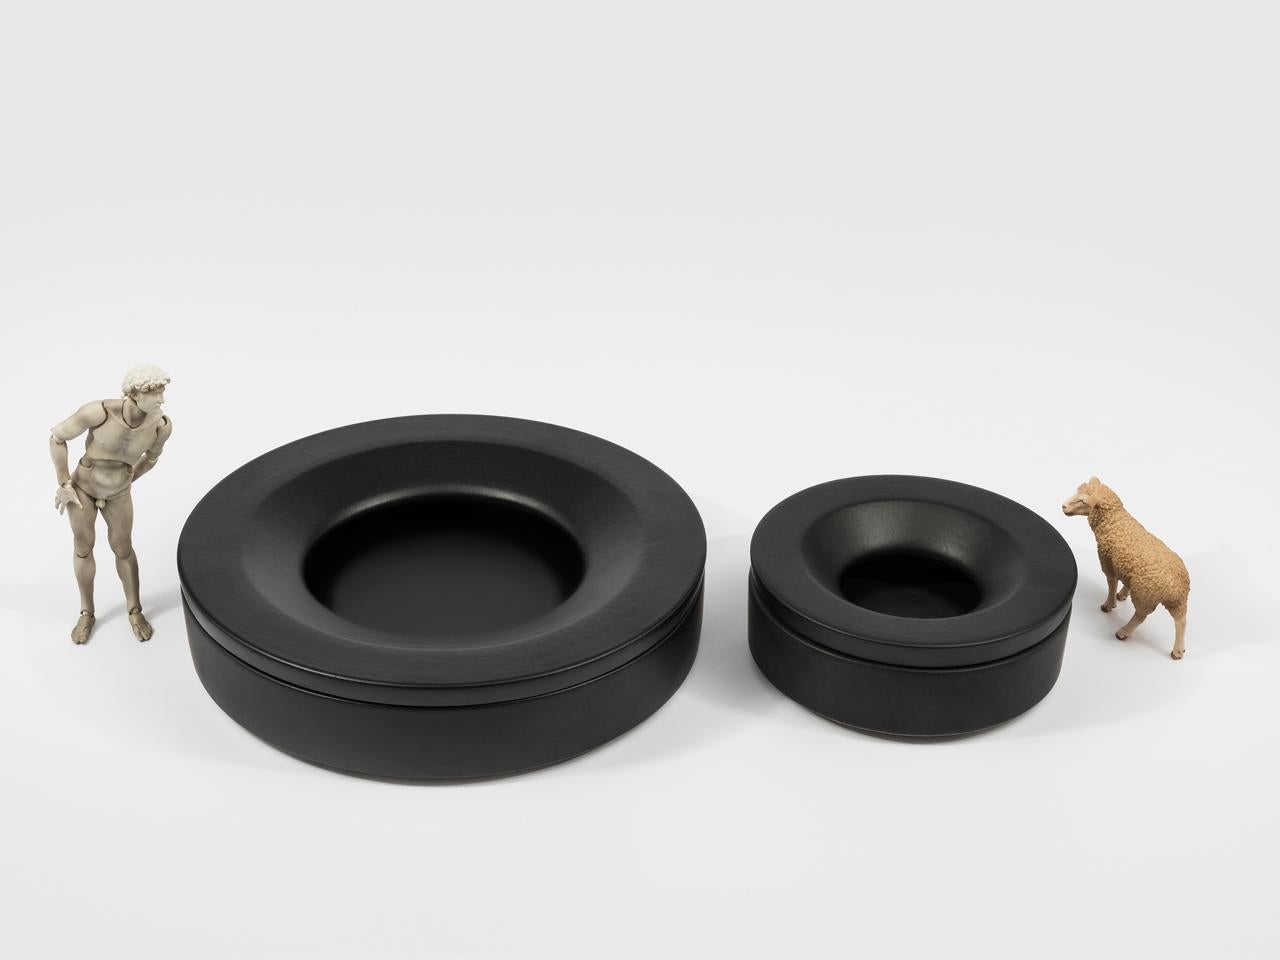 Medium Black Barbados is a glazed ceramic ashtray made up of two parts: a circular base and a ring shaped lid that fits on top and hides part of the contents. The simple, pure geometry of the design give Barbados a distinctive aura that almost turns